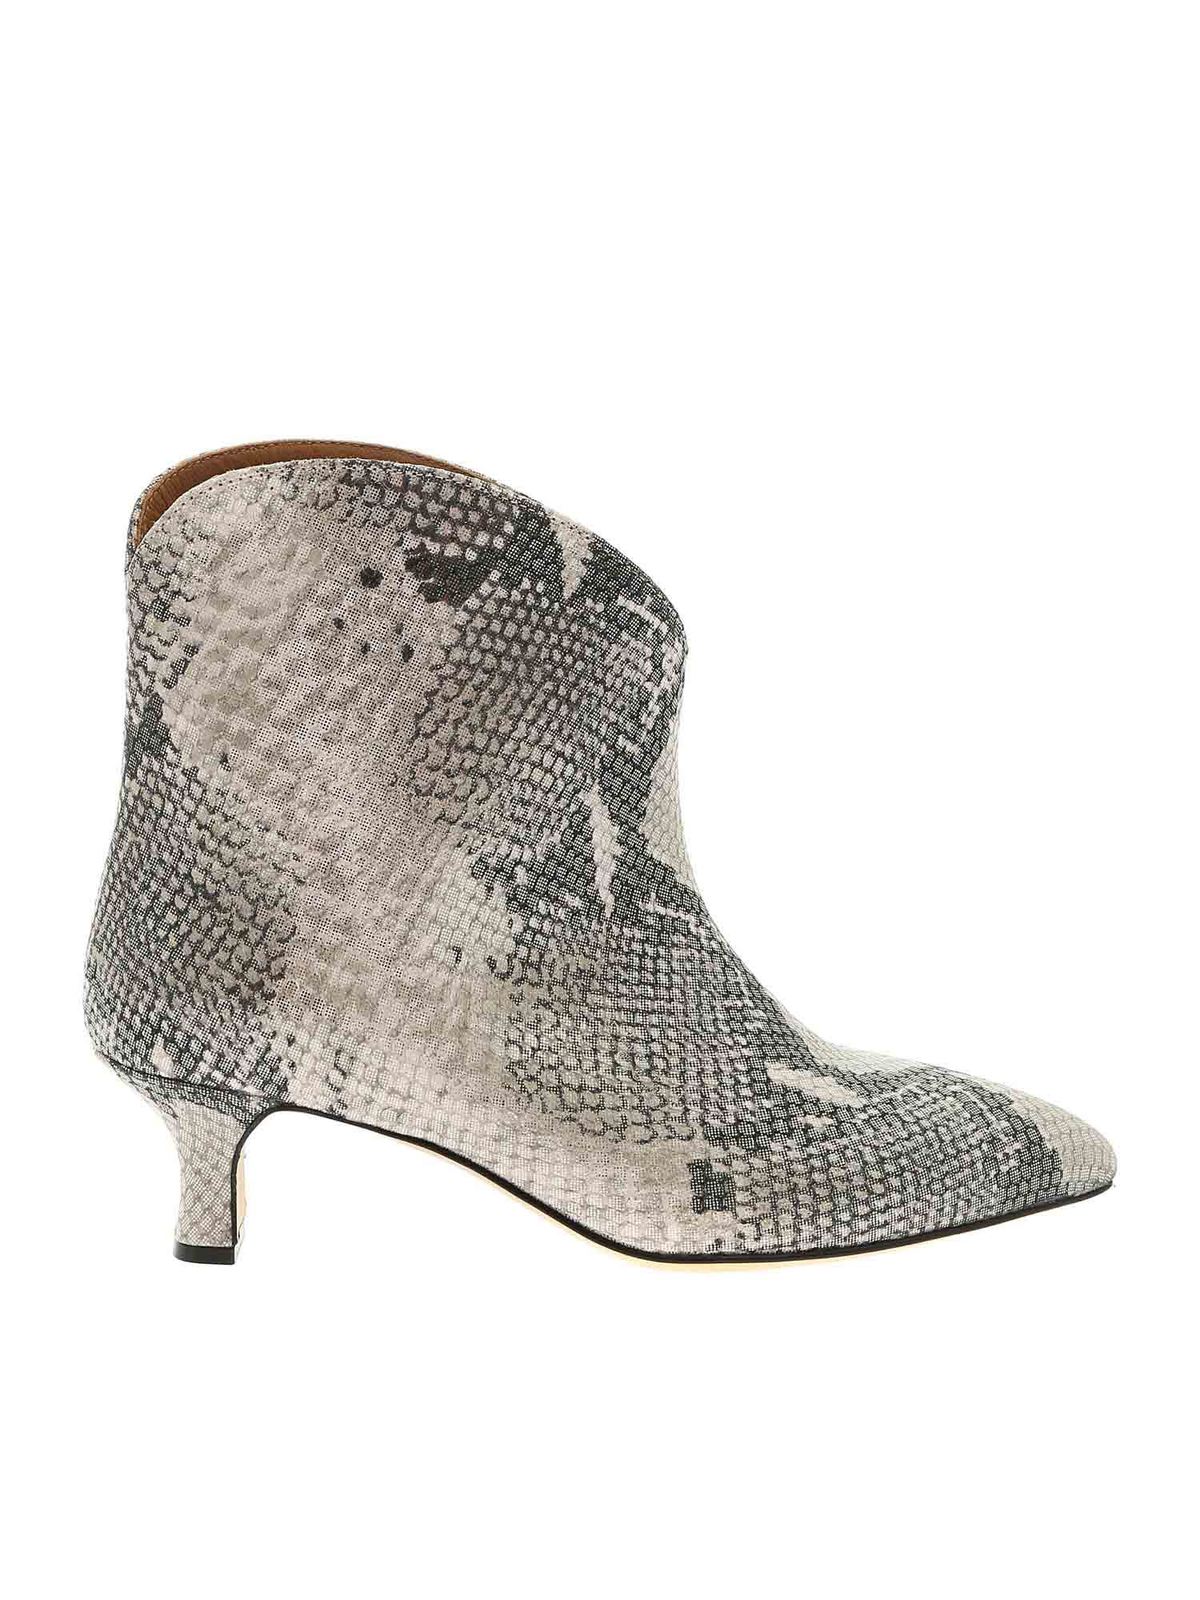 PARIS TEXAS REPTILE PRINT ANKLE BOOTS IN GREY AND BLACK